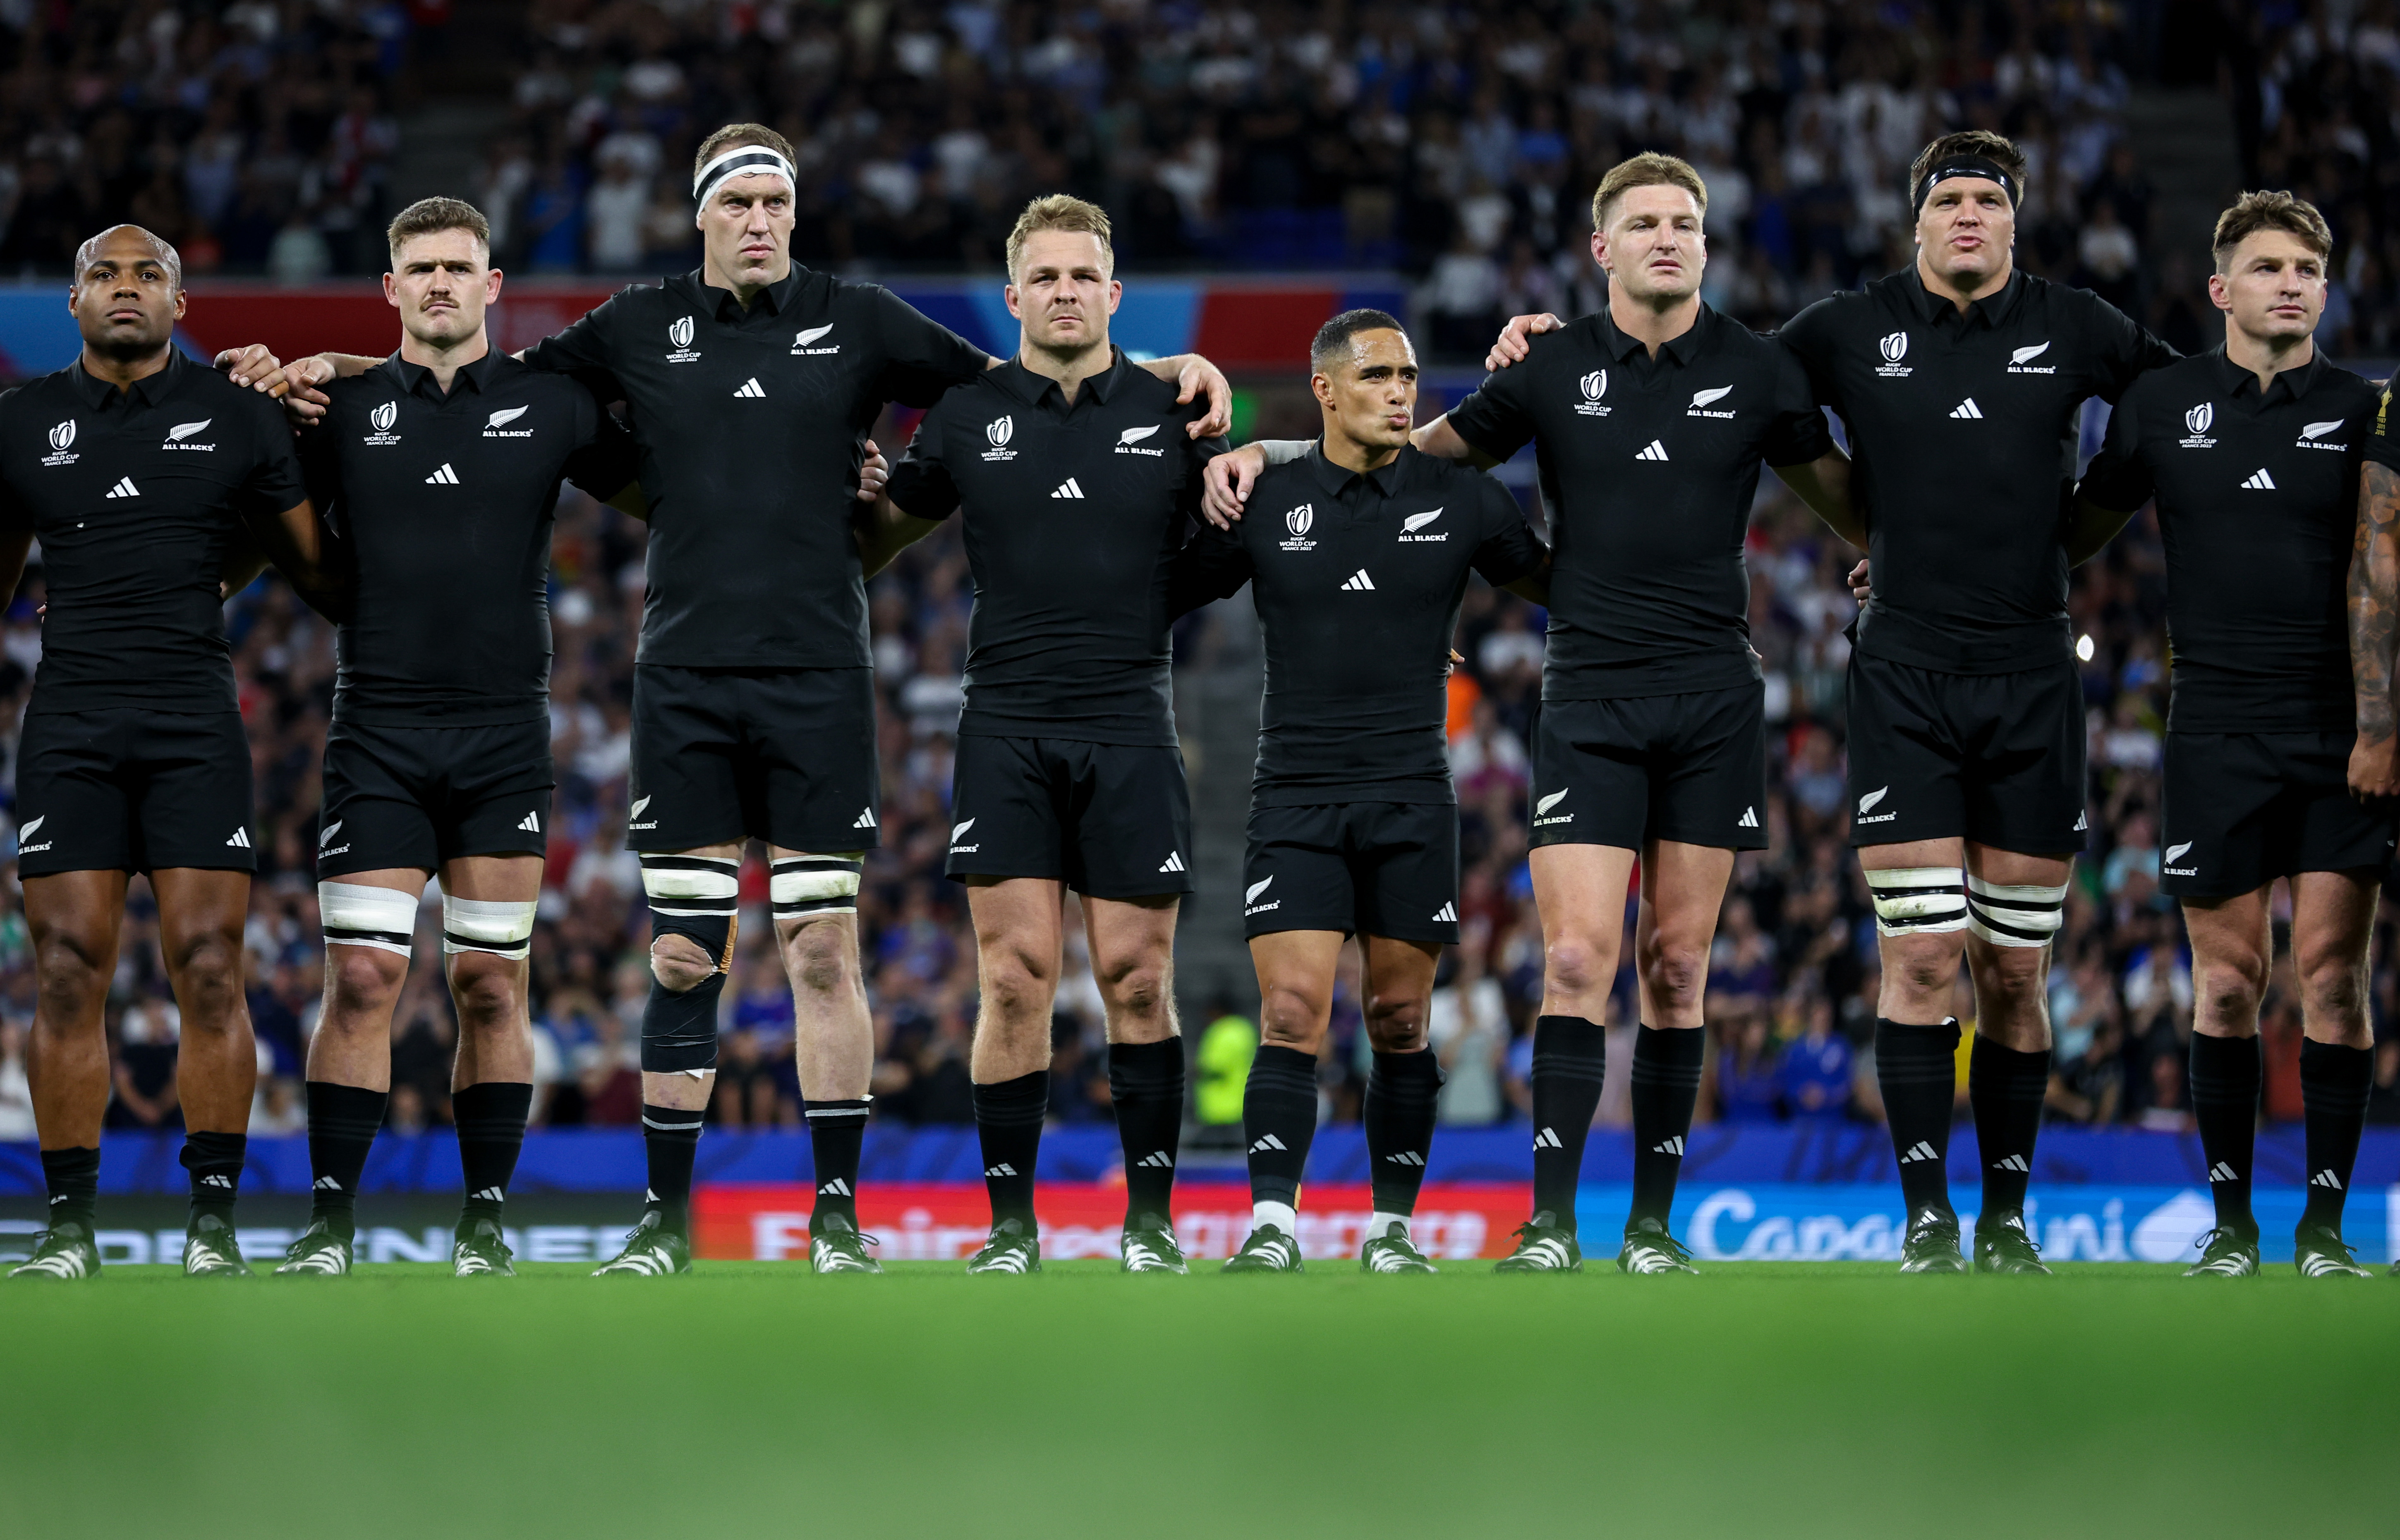 All Blacks named for Rugby World Cup final against South Africa